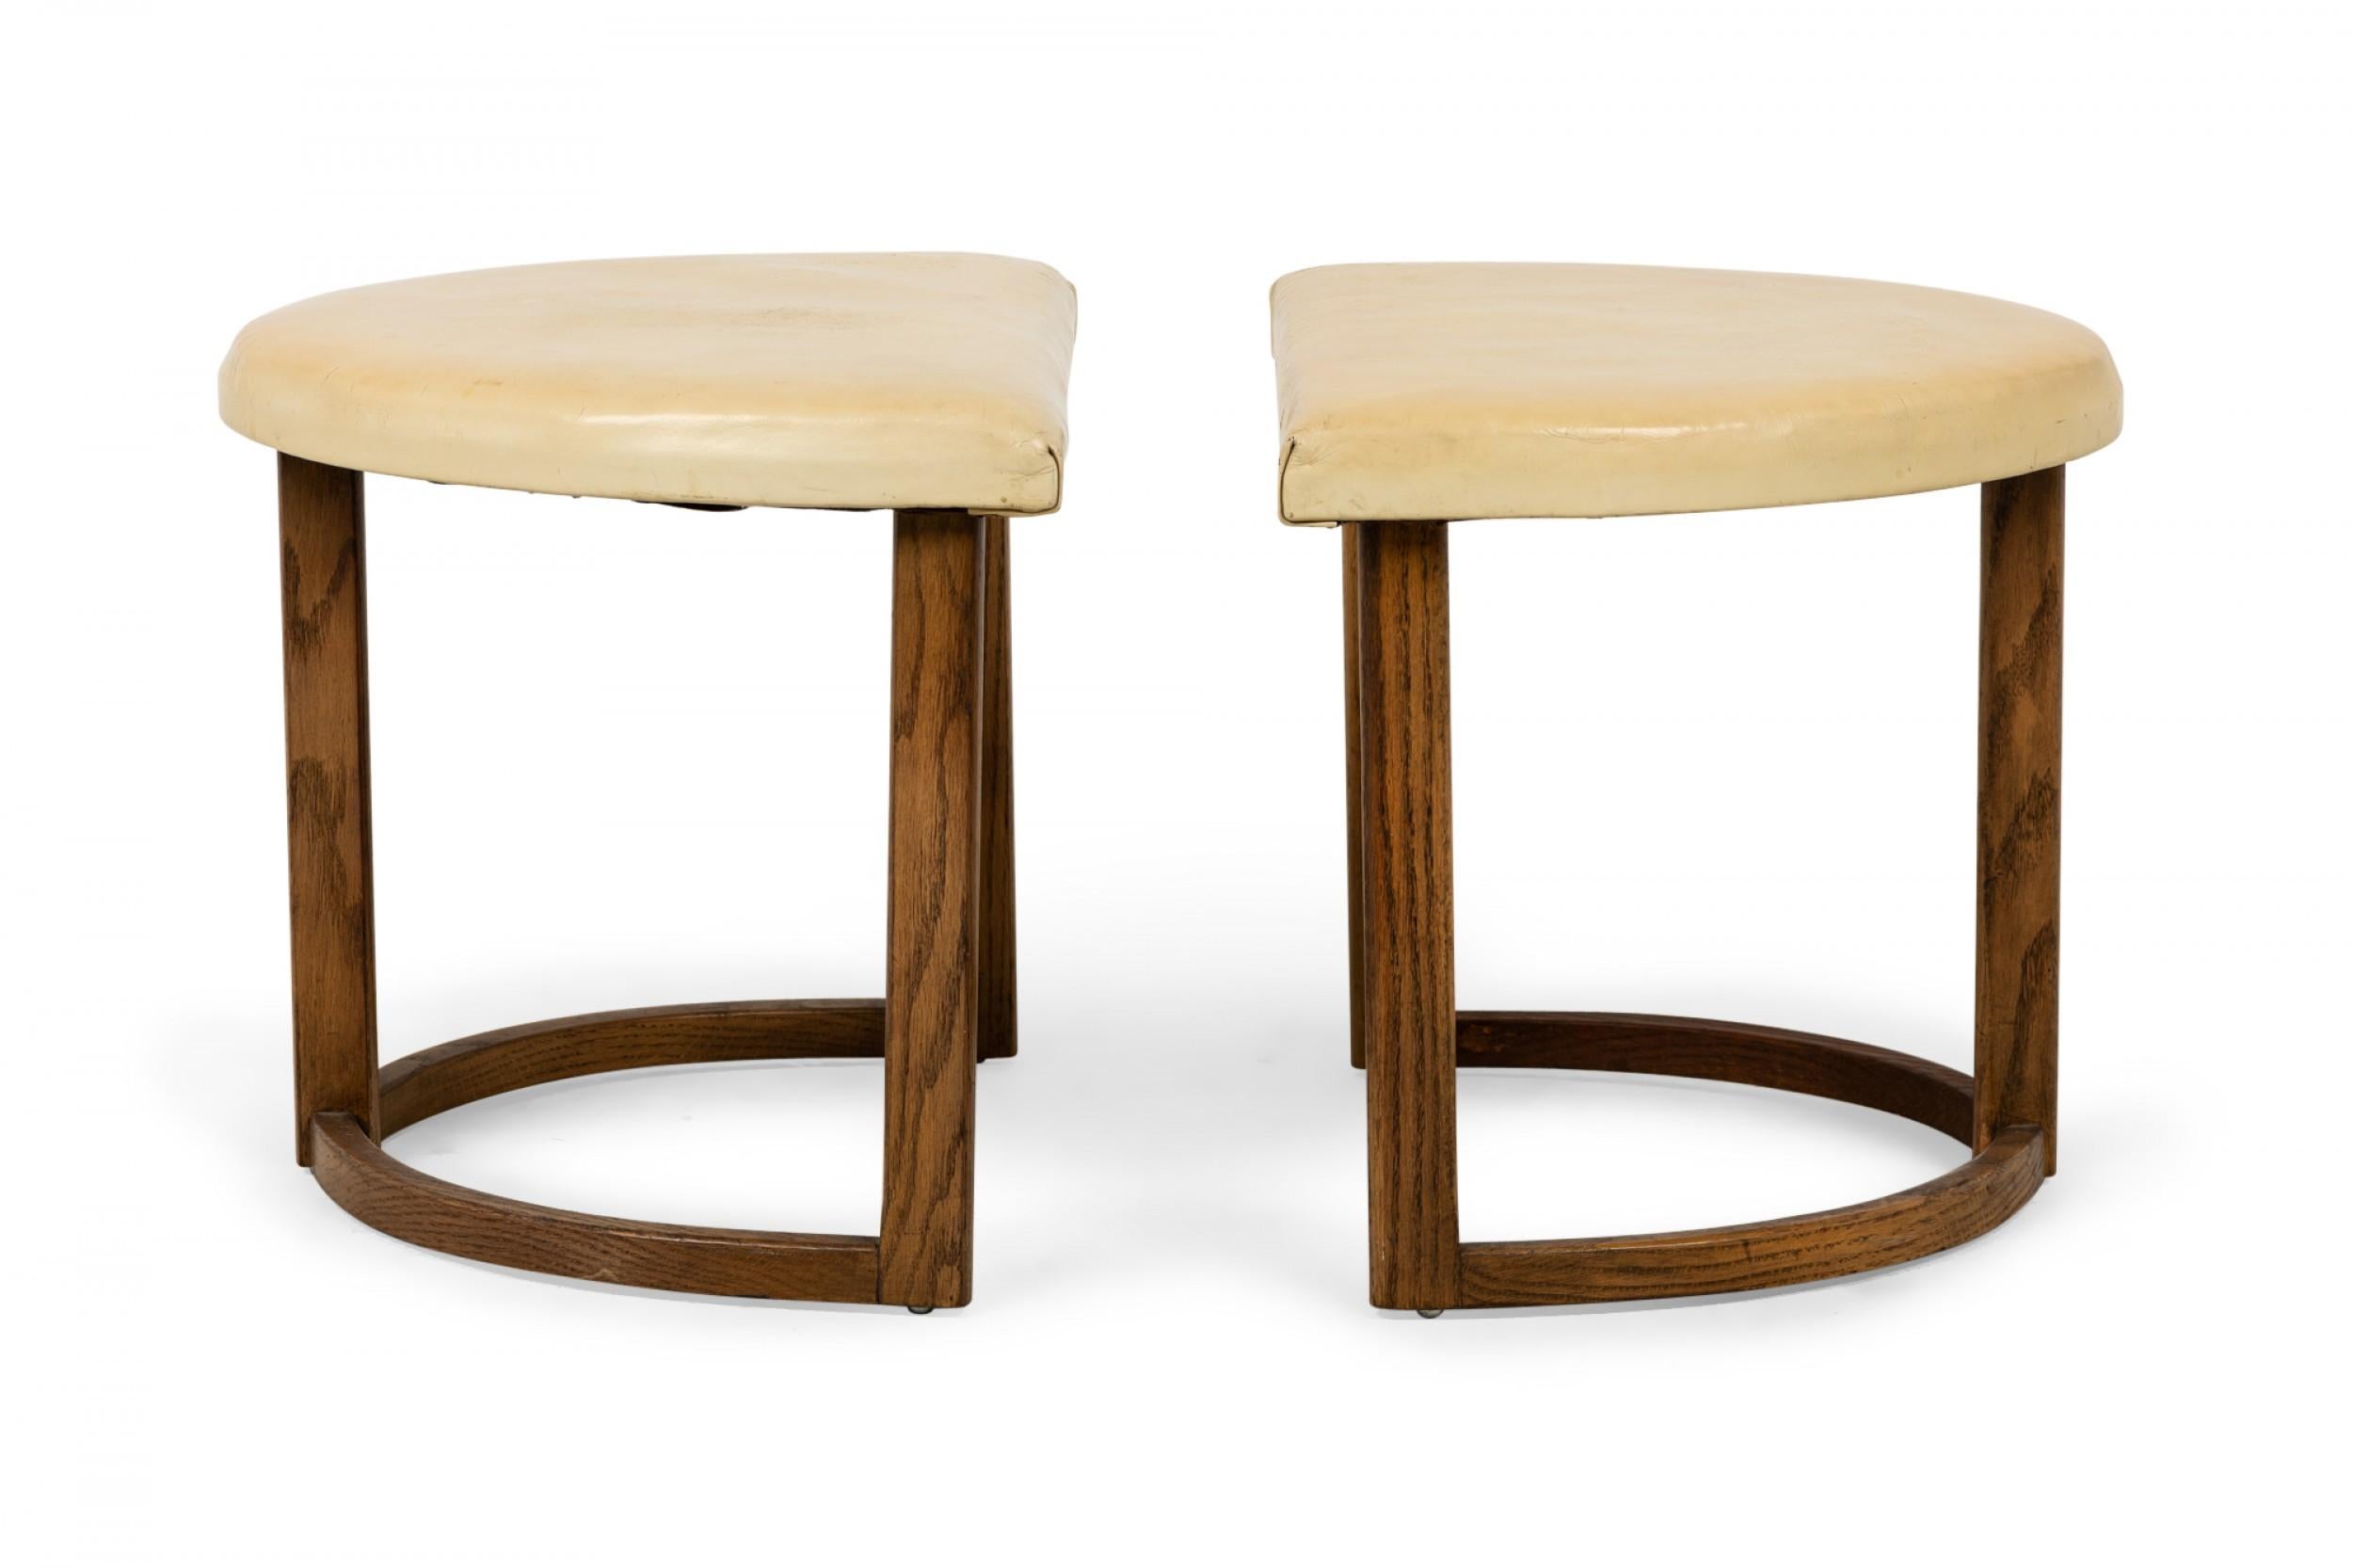 Pair of American mid-century half-moon form footstools with demilune beige leather tops resting on walnut frames with curved bases. (Priced as pair).